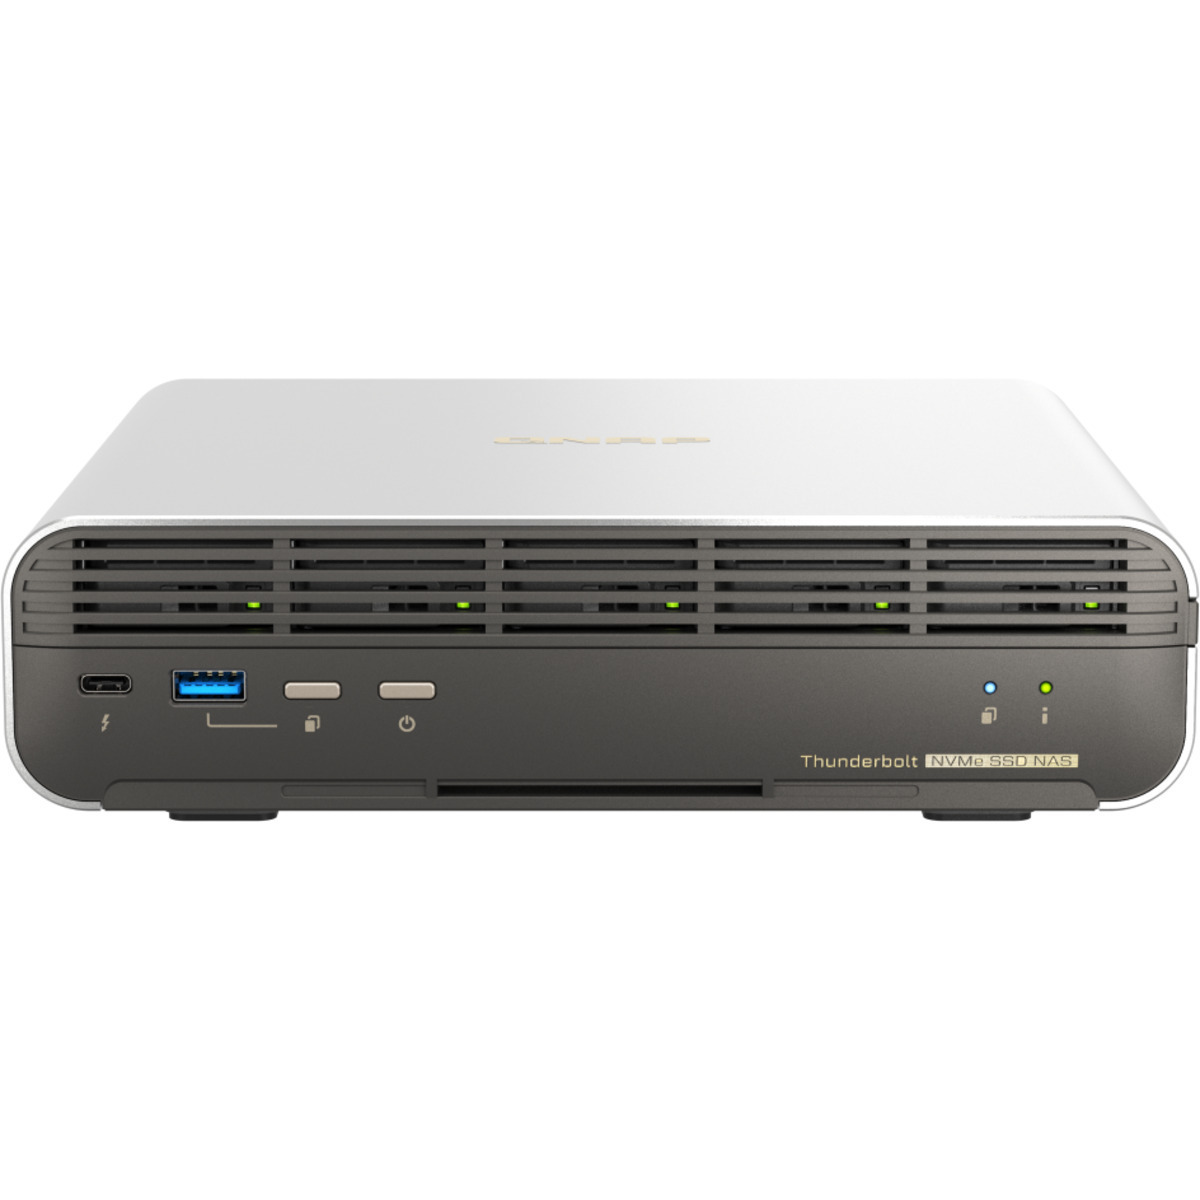 QNAP TBS-h574TX Core i3 Thunderbolt 4 4tb 5-Bay Desktop Multimedia / Power User / Business DAS-NAS - Combo Direct + Network Storage Device 4x1tb Crucial P3 Plus CT1000P3PSSD8  5000/3600MB/s M.2 2280 NVMe SSD CONSUMER Class Drives Installed - Burn-In Tested TBS-h574TX Core i3 Thunderbolt 4